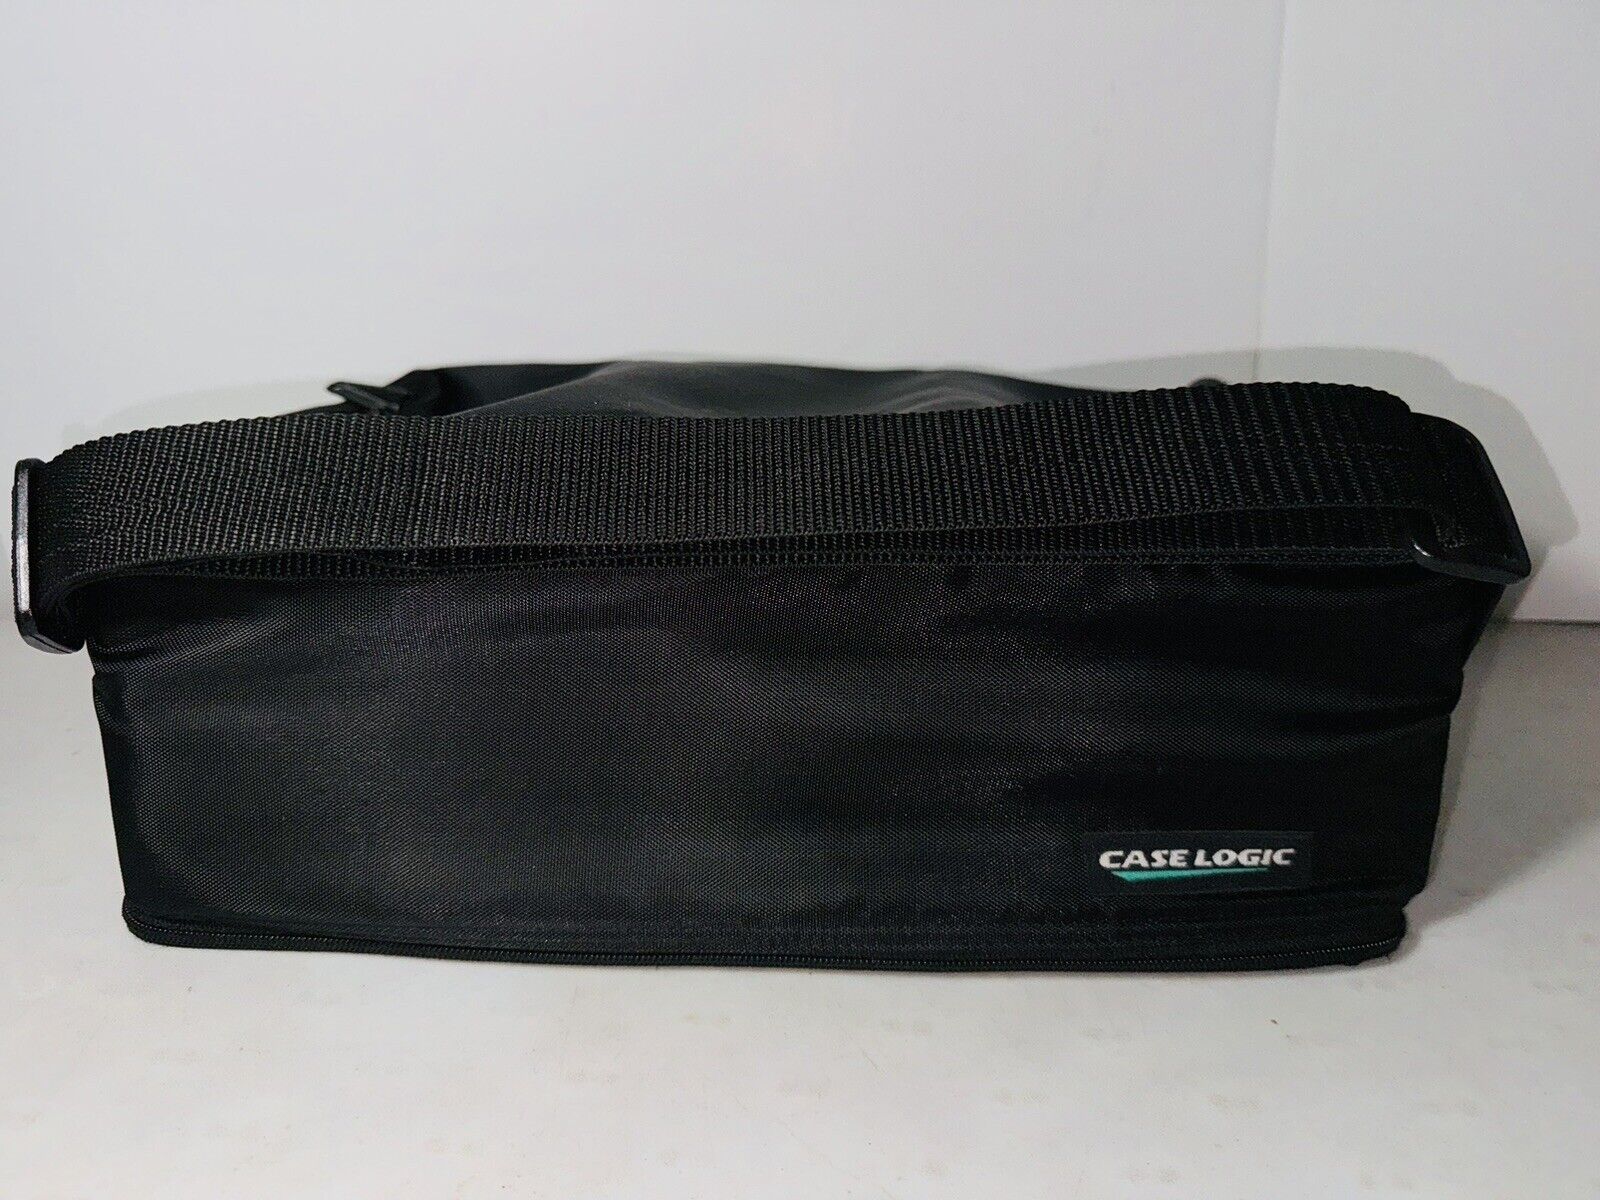 Case Logic 60 Cassette Tape Black Double Sided Carrying Case Bag Tote w/Strap VG